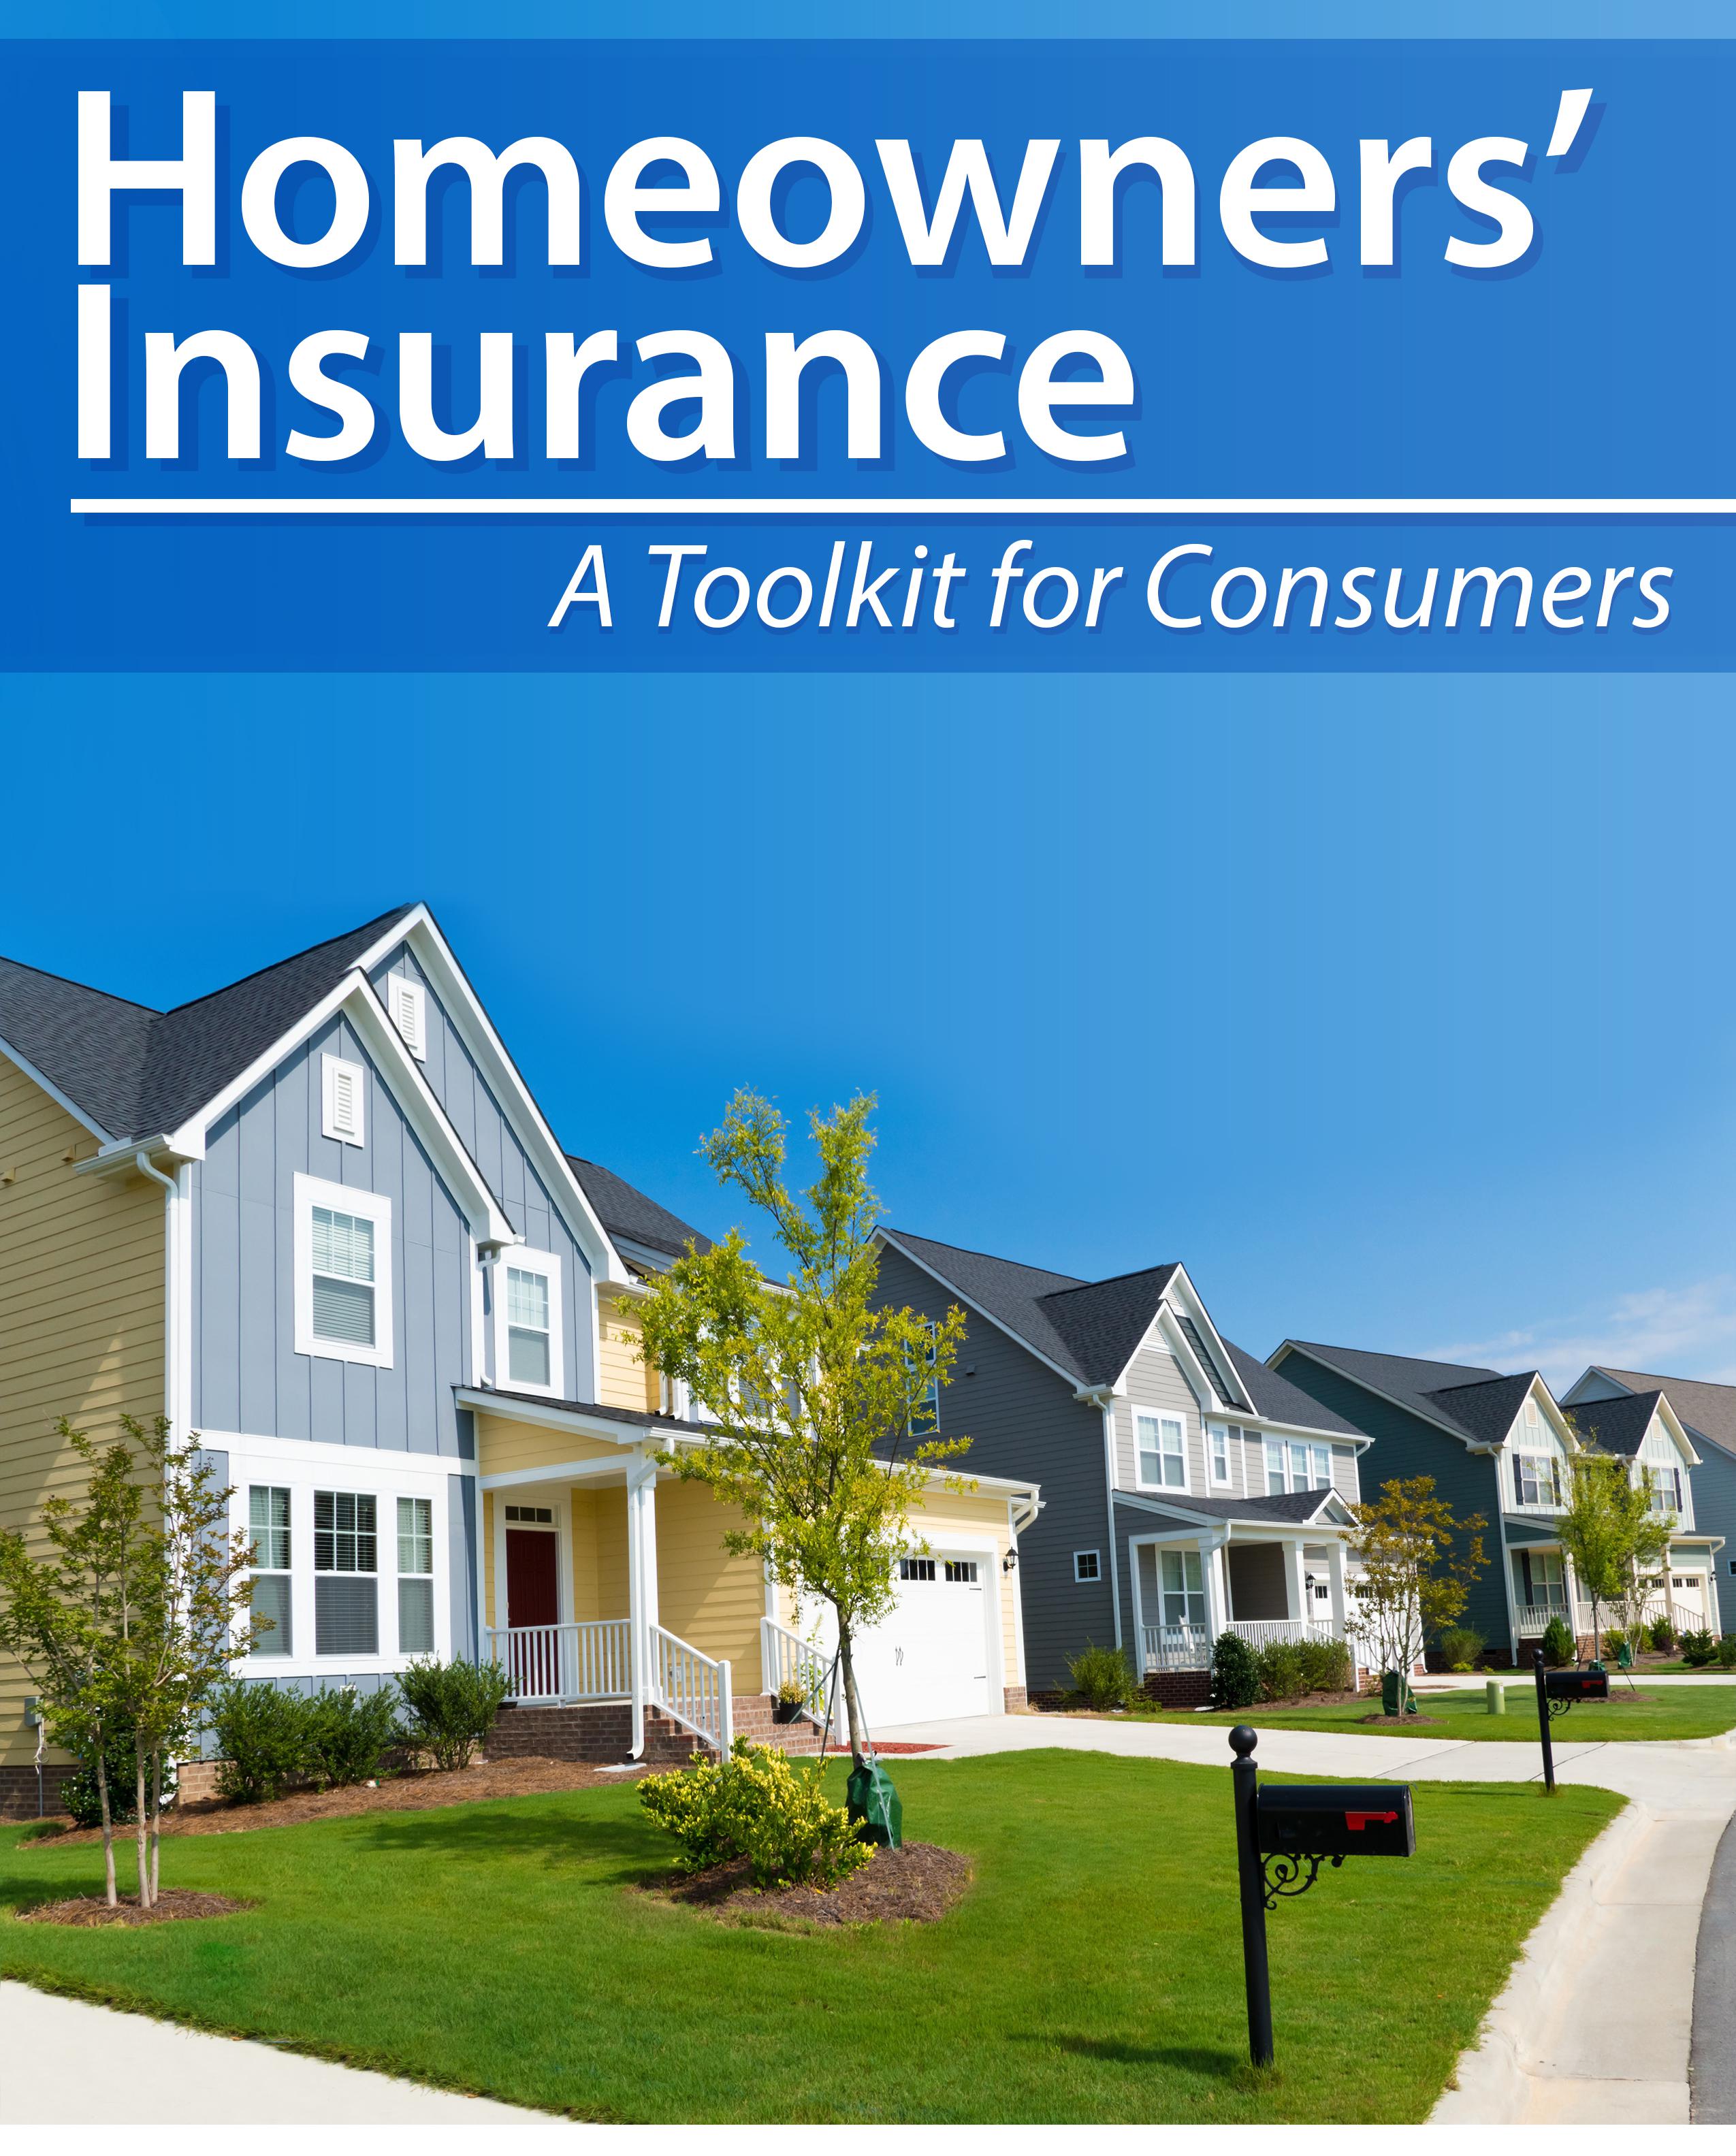 homeowners-insurance-a-toolkit-for-consumers-cohen-law-group